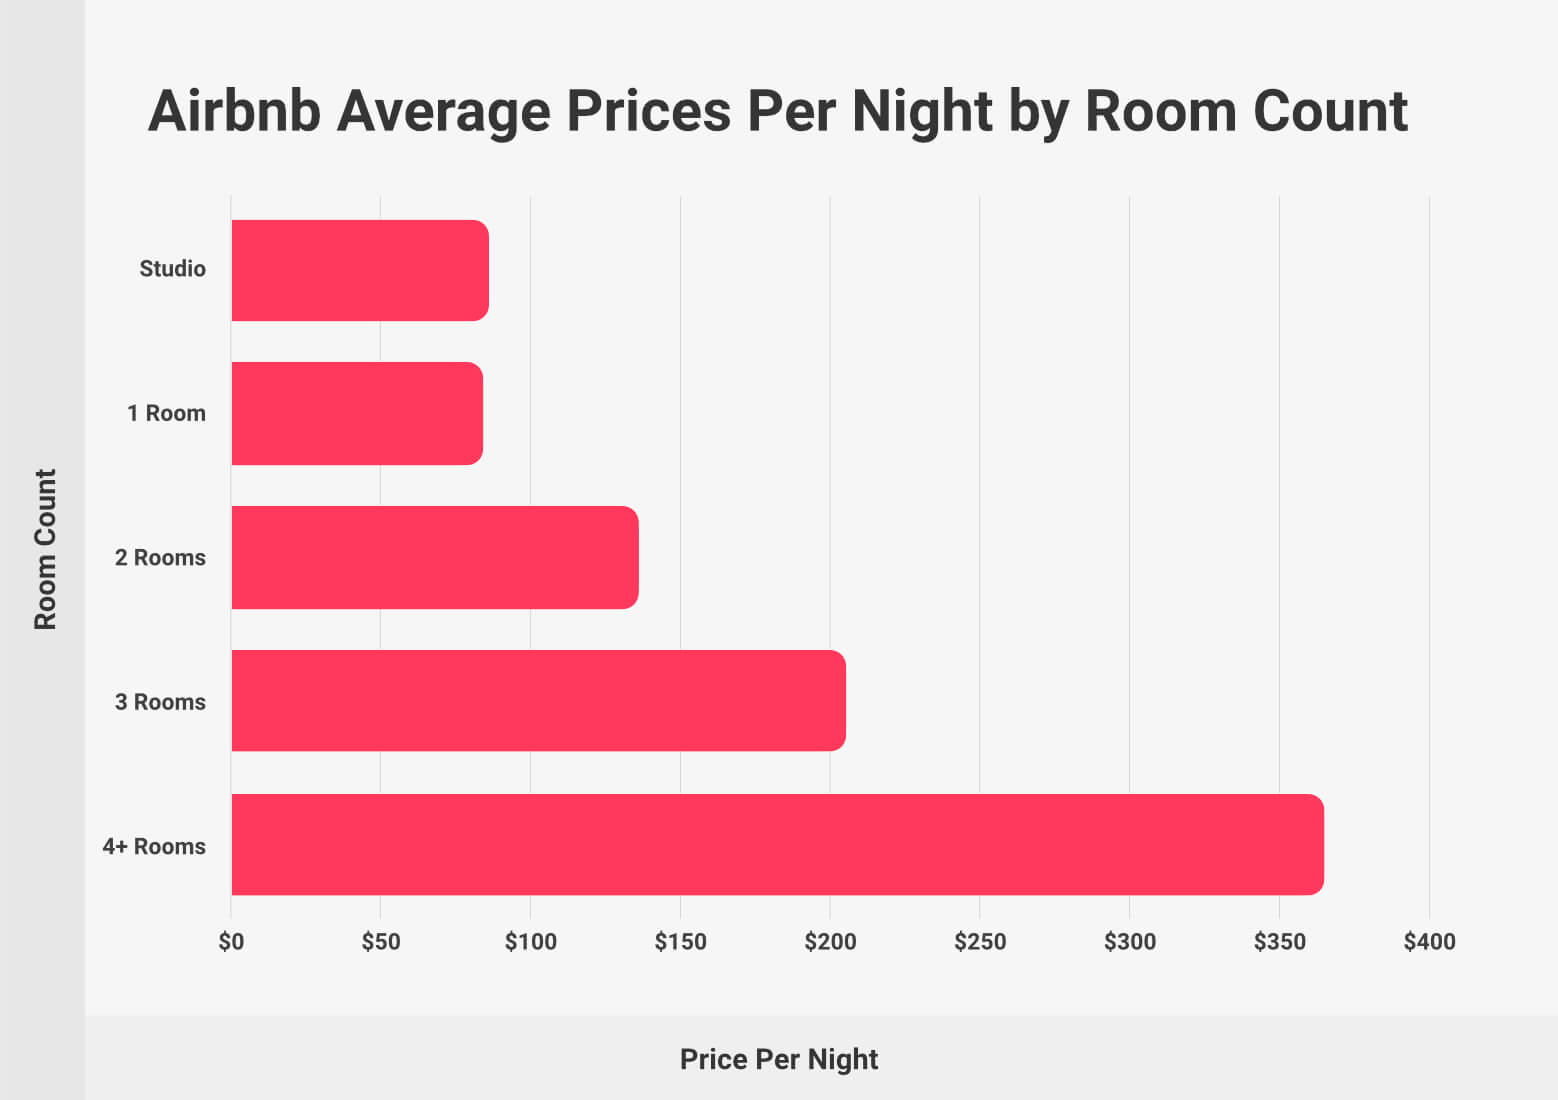 Airbnb Average Prices Per Night by Room Count